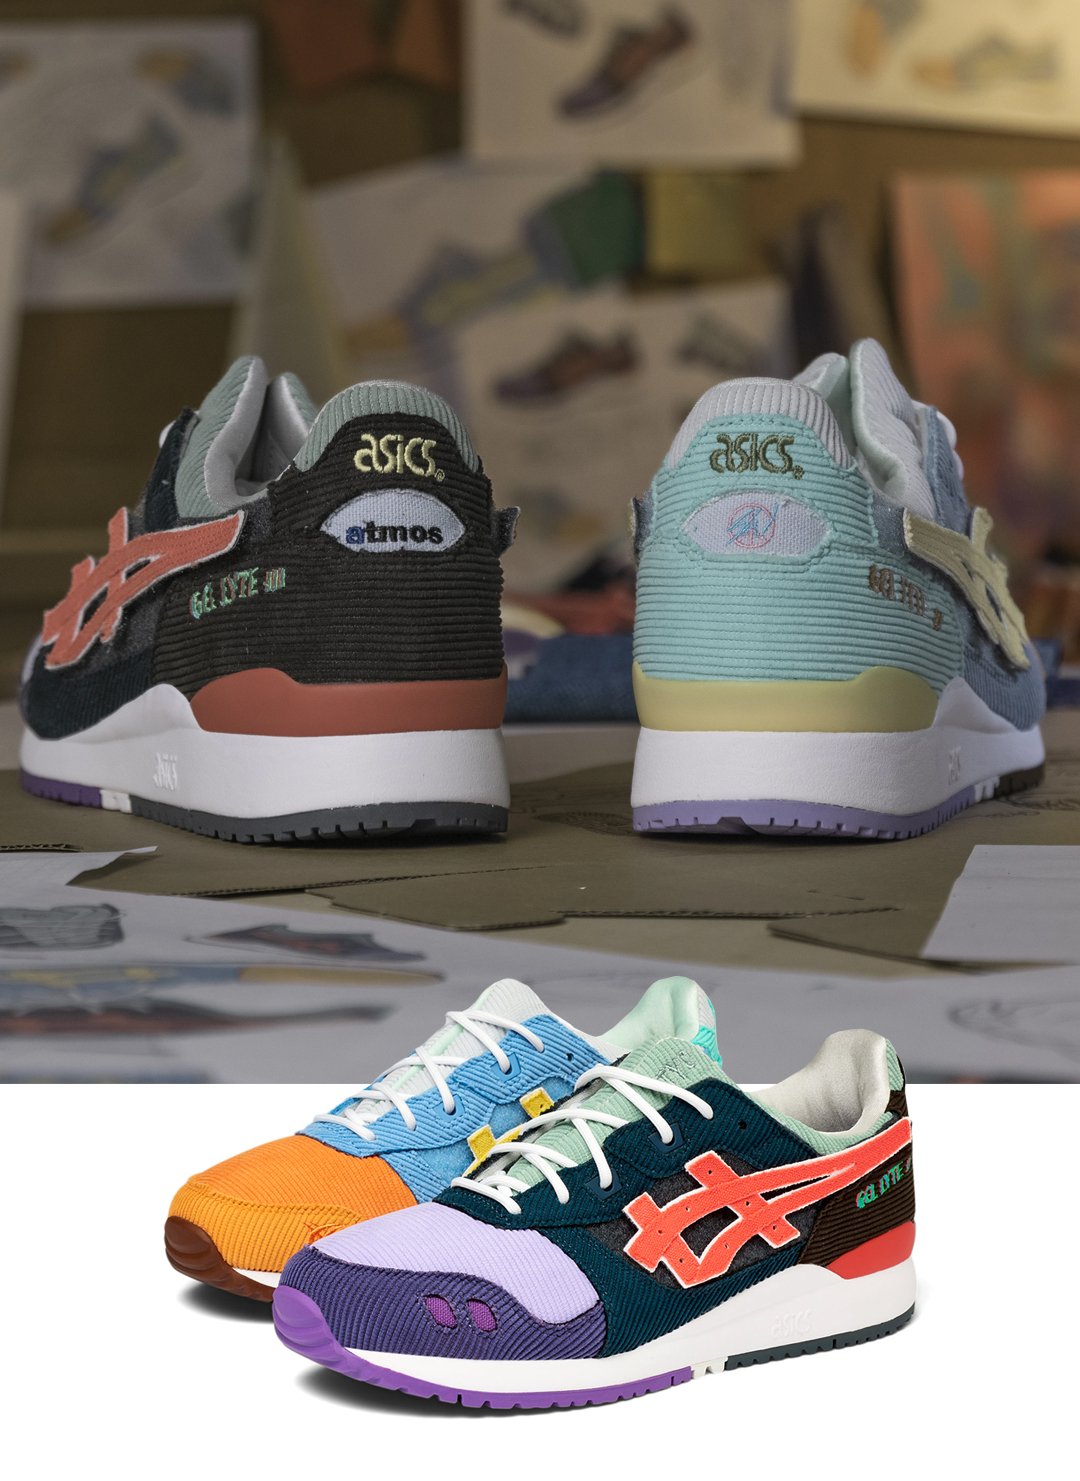 ASICS X ATMOS X SEAN WOTHERSPOON 